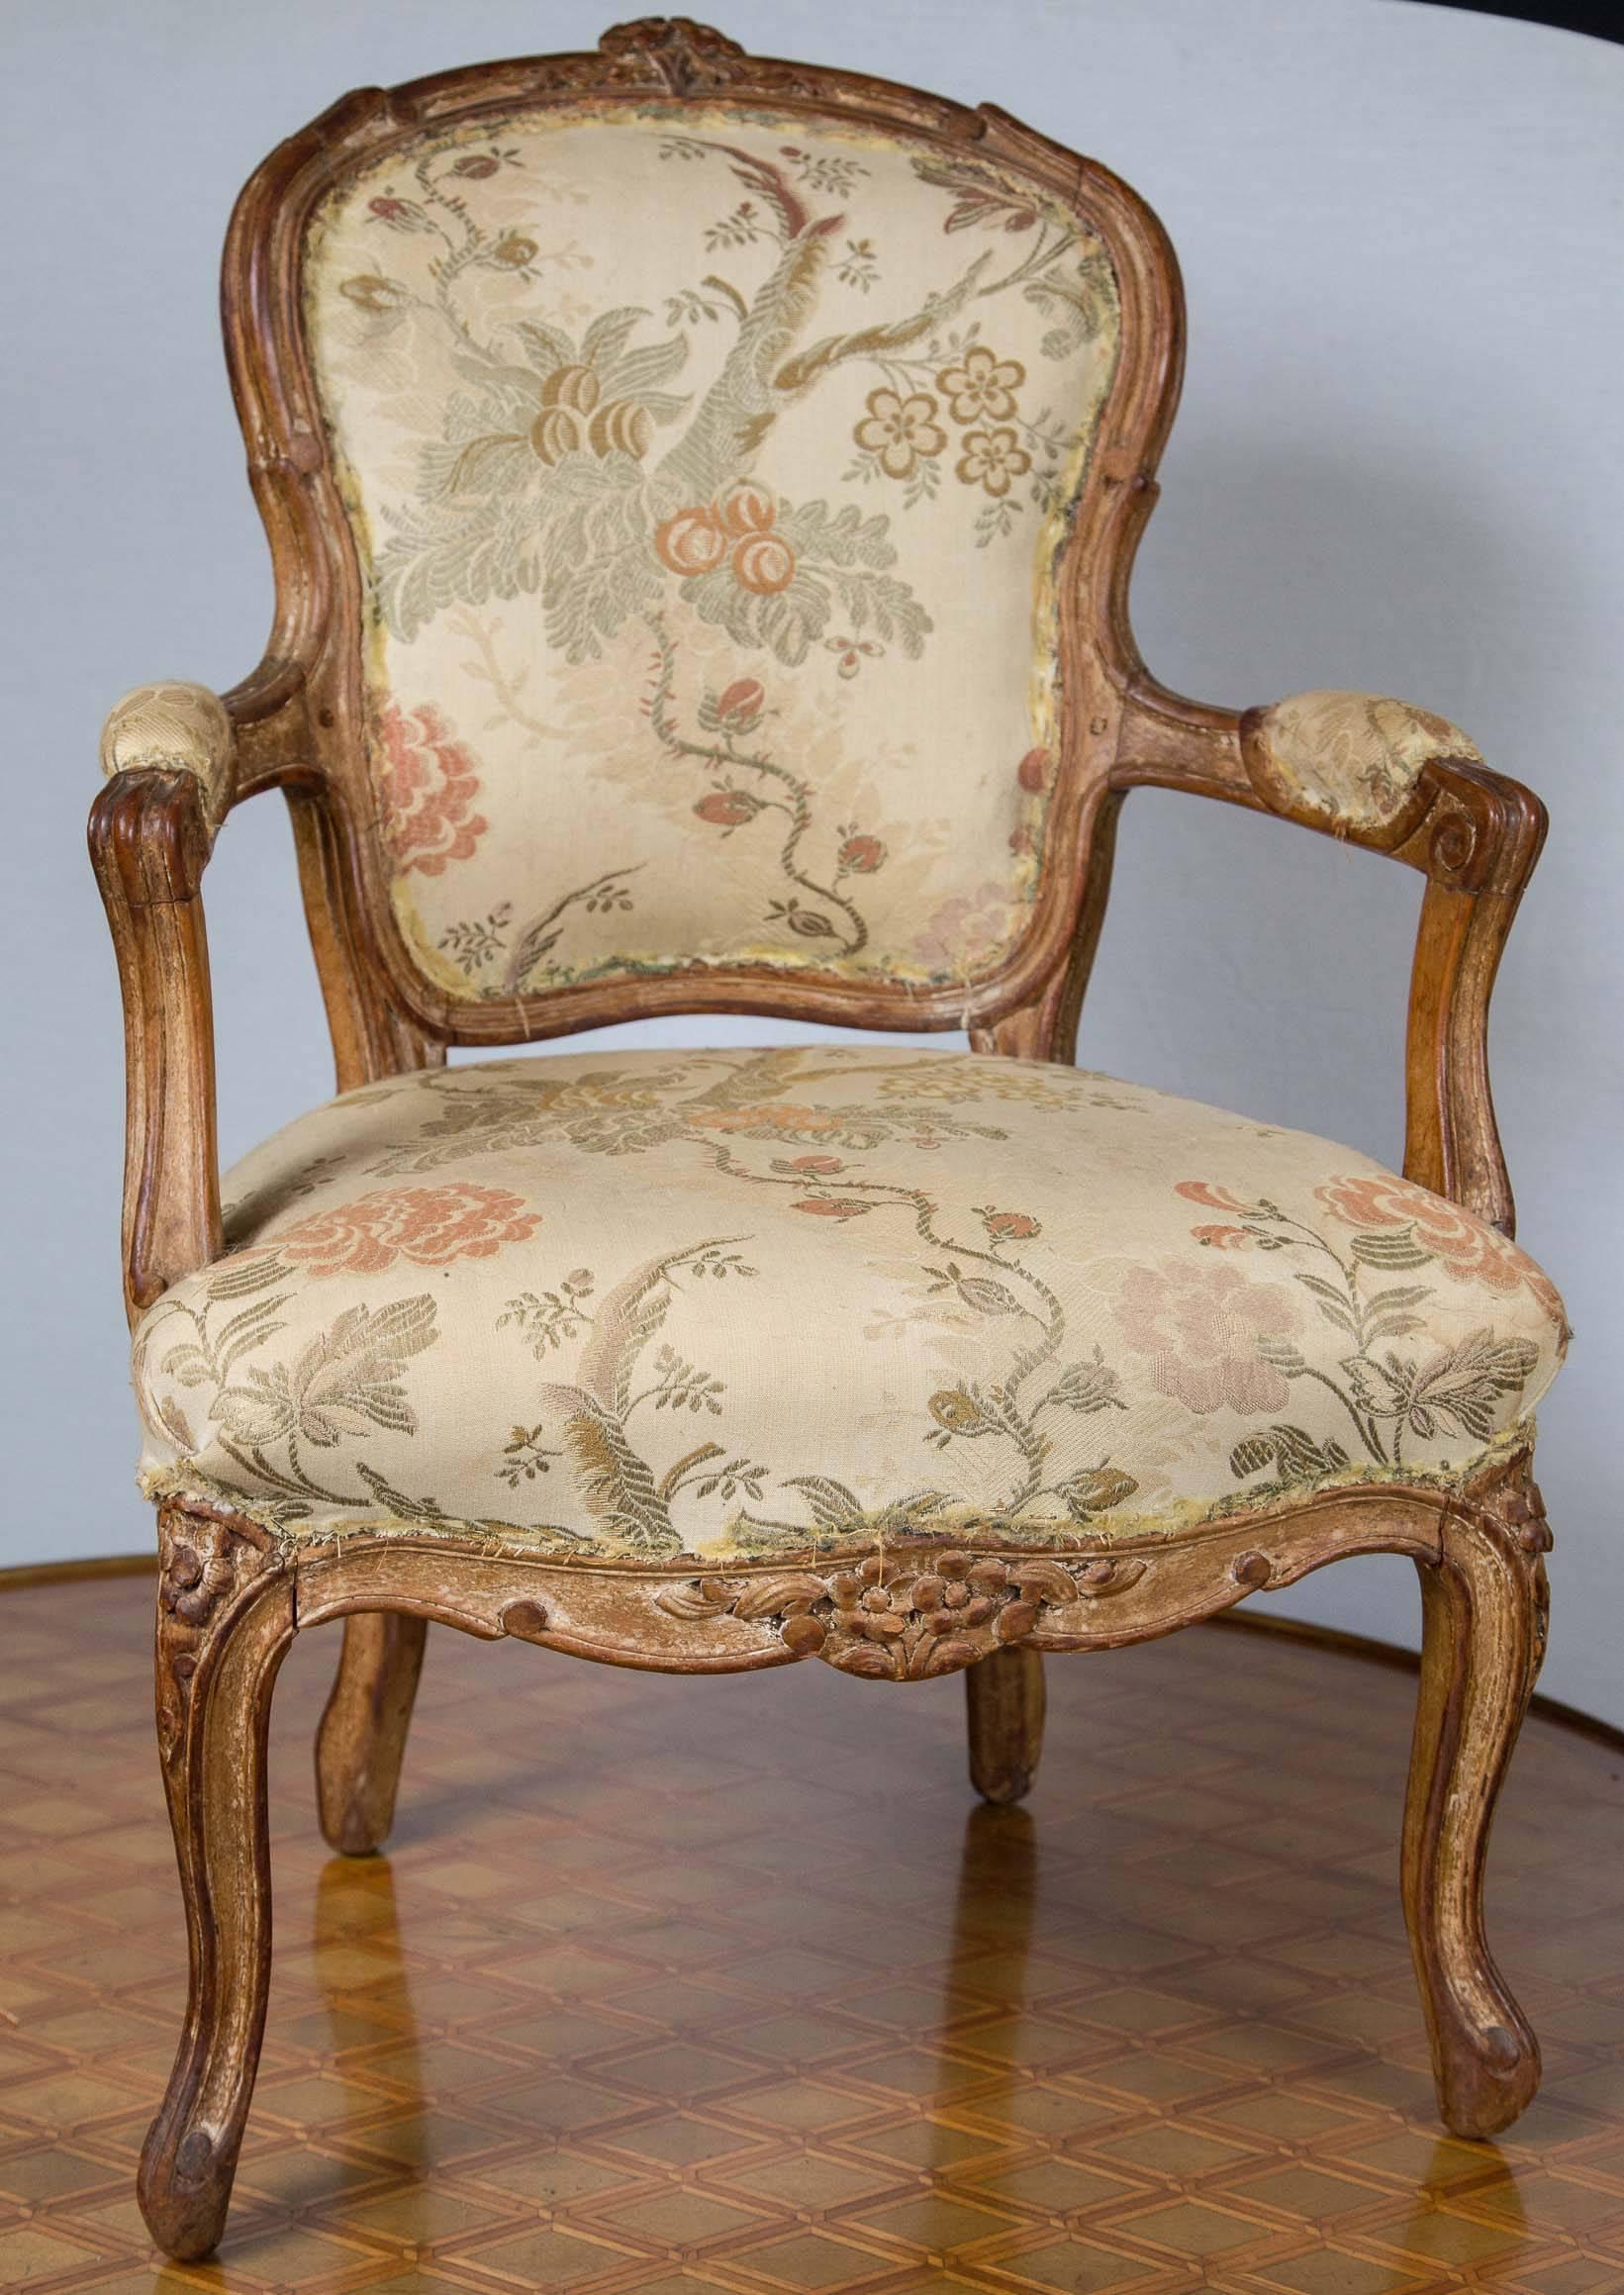 Worn paint, antique fabric and beautiful simple carvings make this rare open armchair very special. Fully pegged, braced back, arched top, padded arms and cabriole legs.
Something very special for the collector or designer.